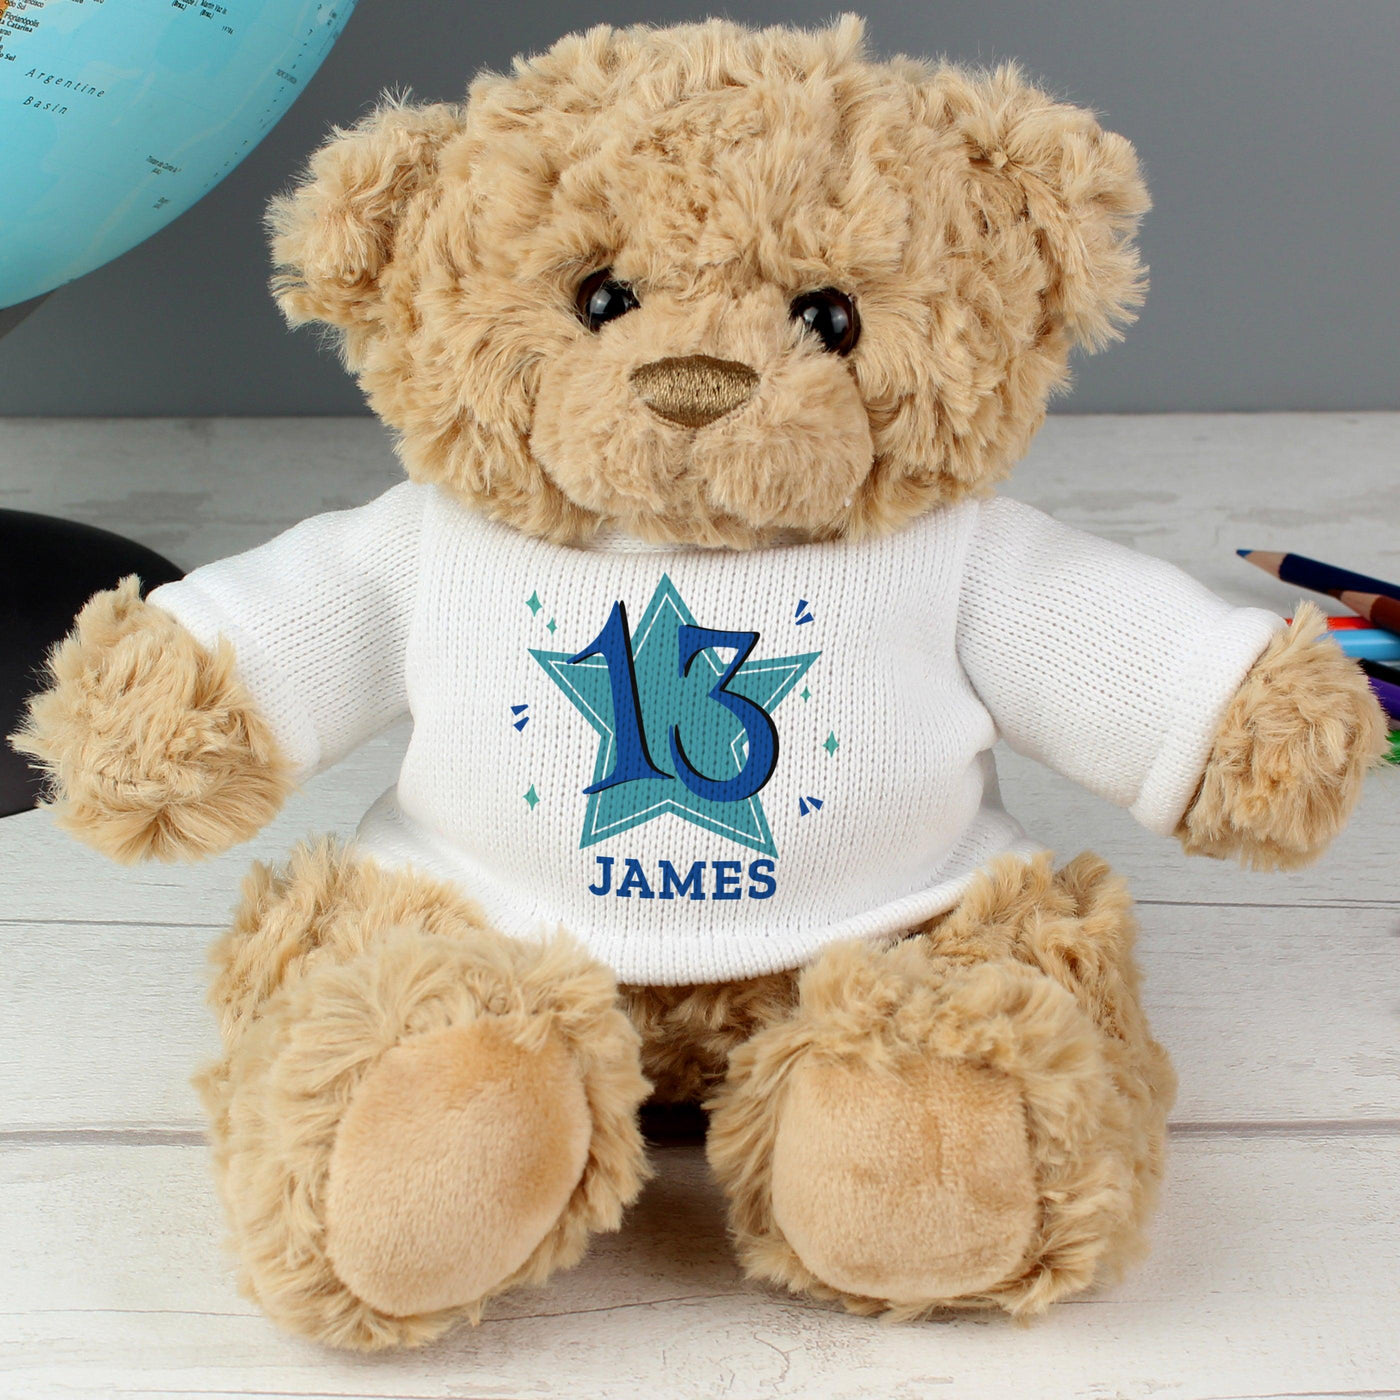 Personalised Blue Big Age Teddy Bear - Shop Personalised Gifts